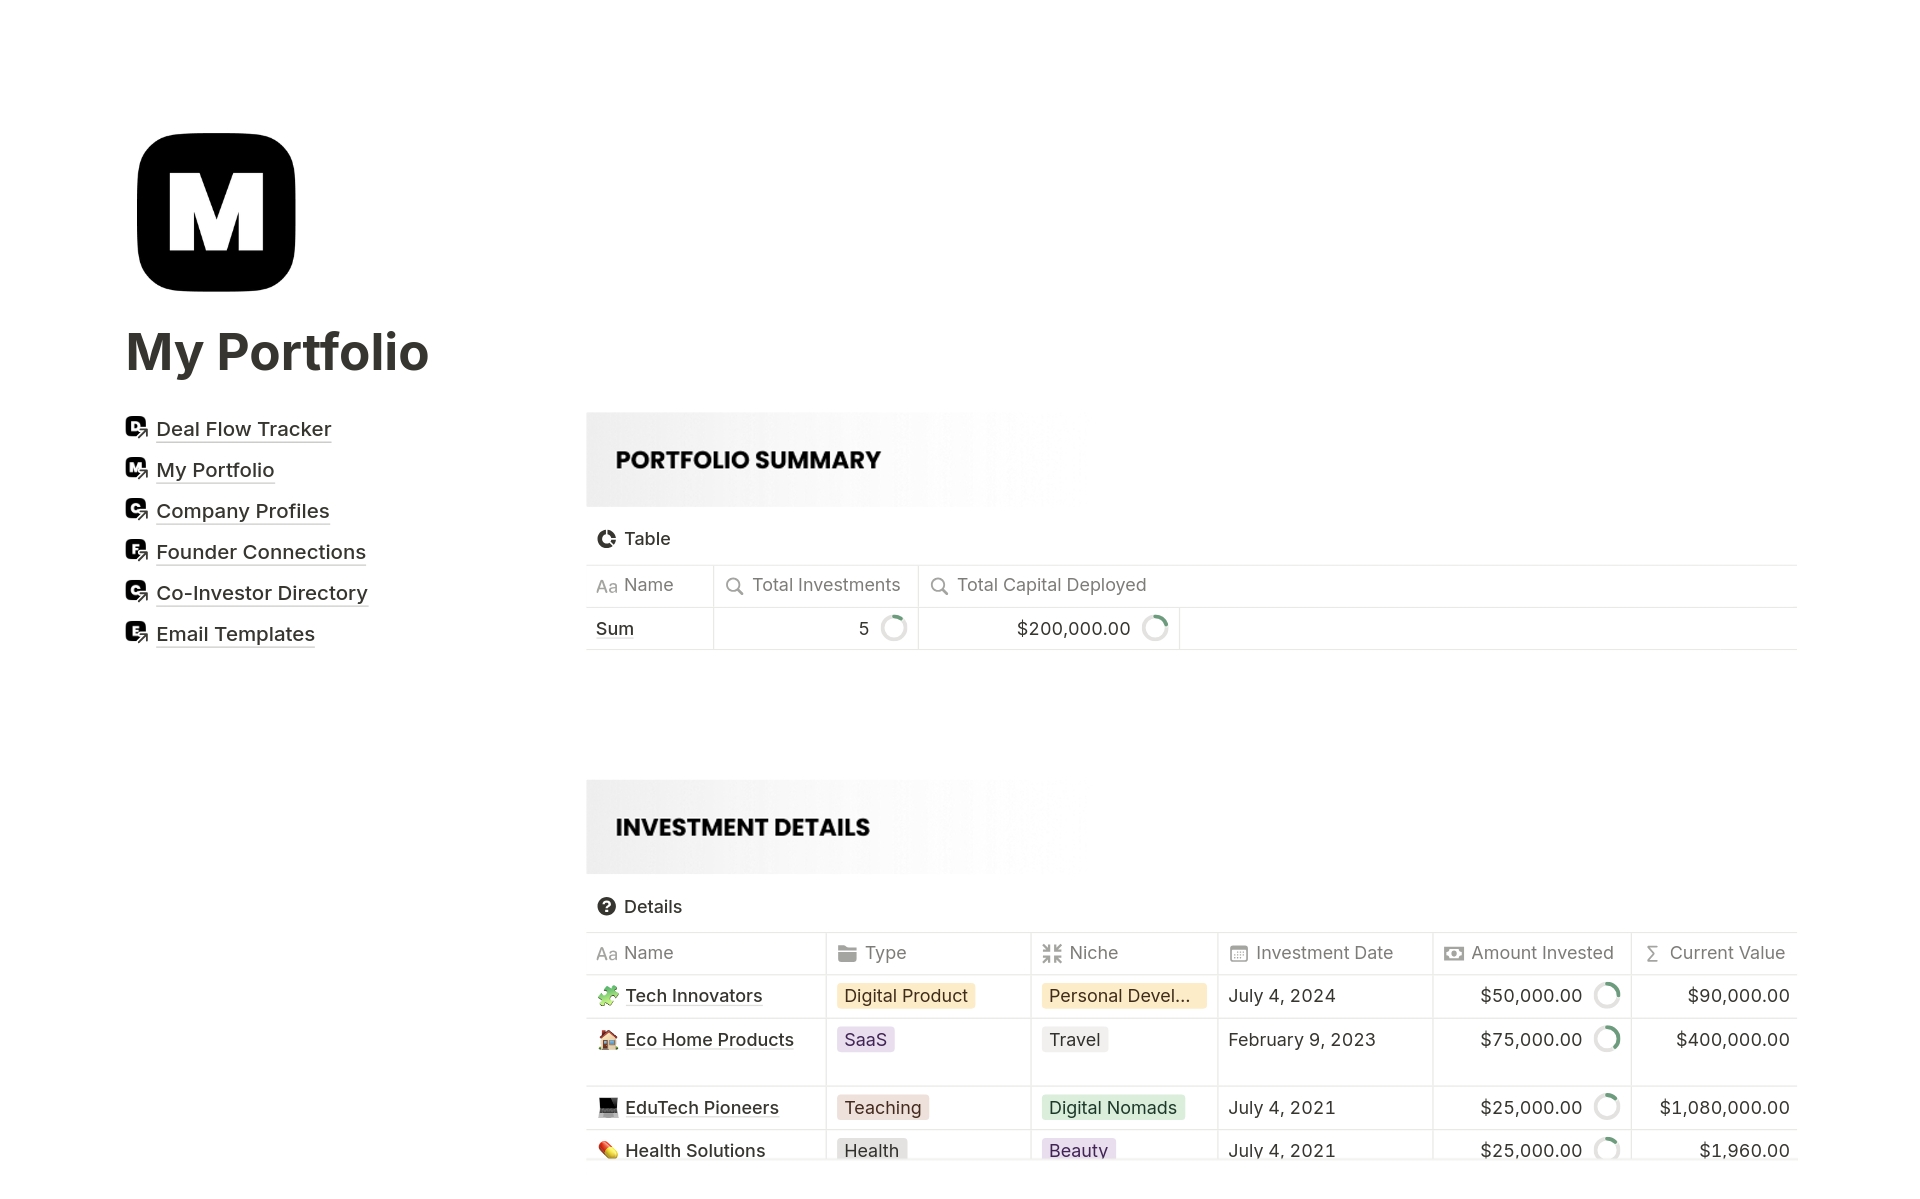 Streamline your angel investments with our comprehensive Notion template. Manage your deal flow, track portfolio performance, and maintain strong connections with founders and co-investors—all in one place.